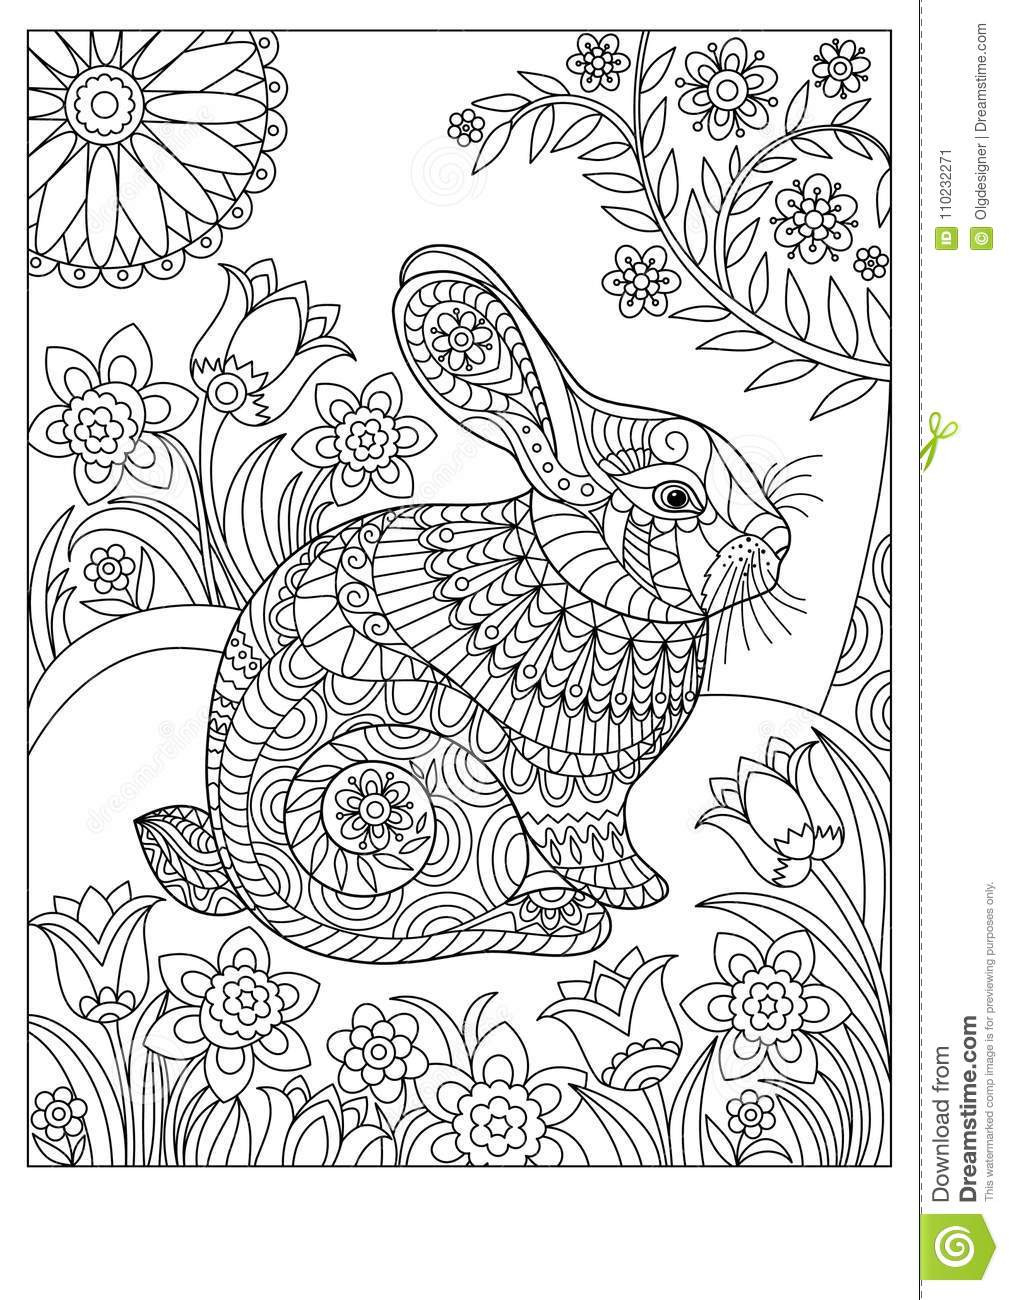 Spring Coloring Pages For Adults
 Spring Rabbit Coloring Page For Adult And Children Stock